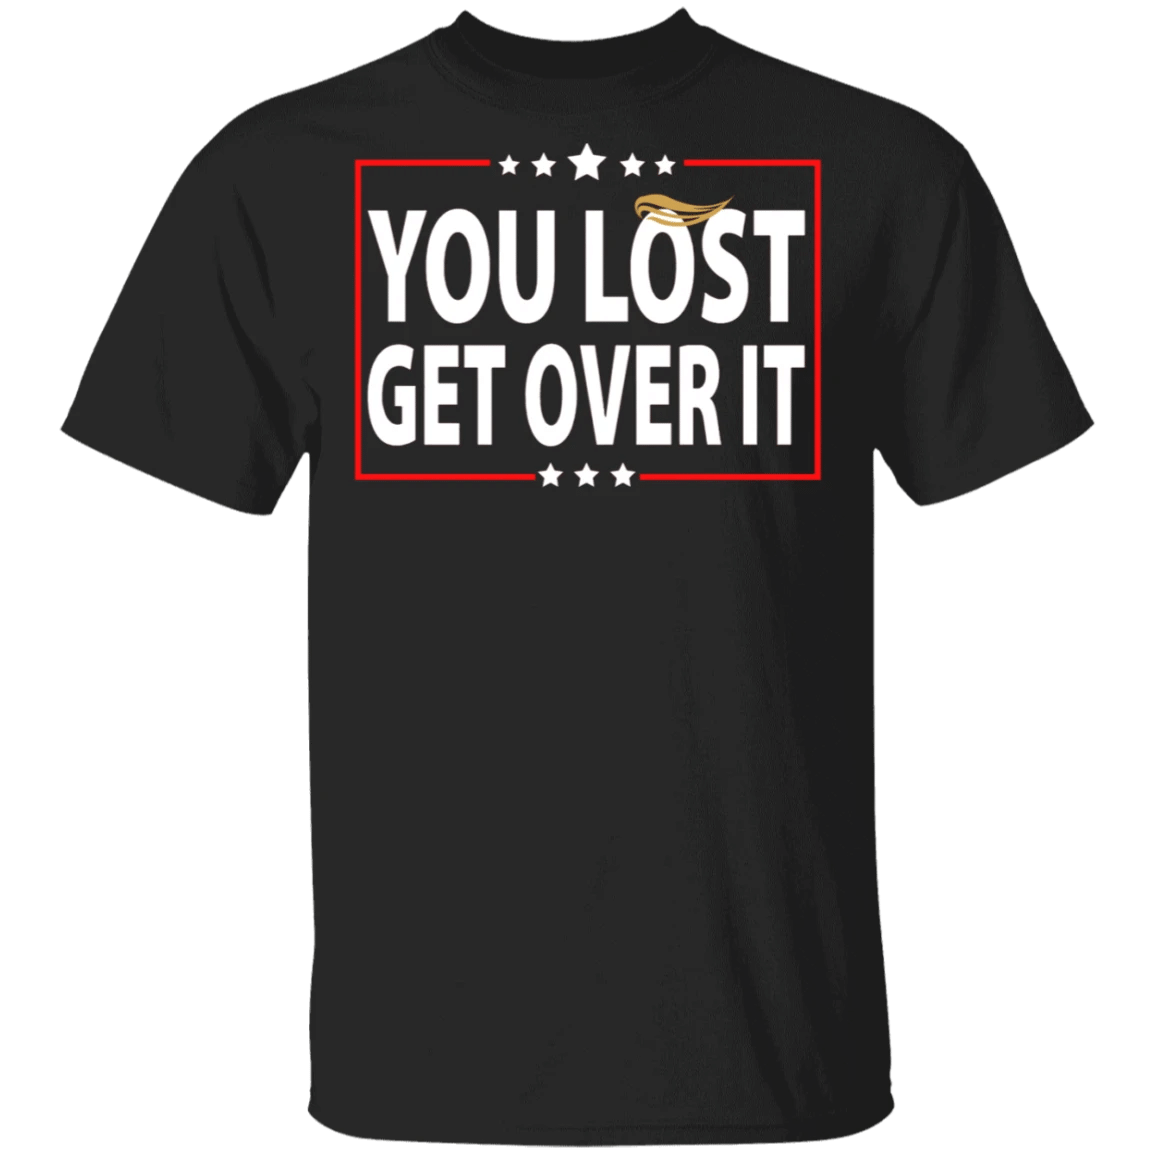 You Lost Get Over It T-Shirt Funny Humor Anti Trump Political Unisex C ...